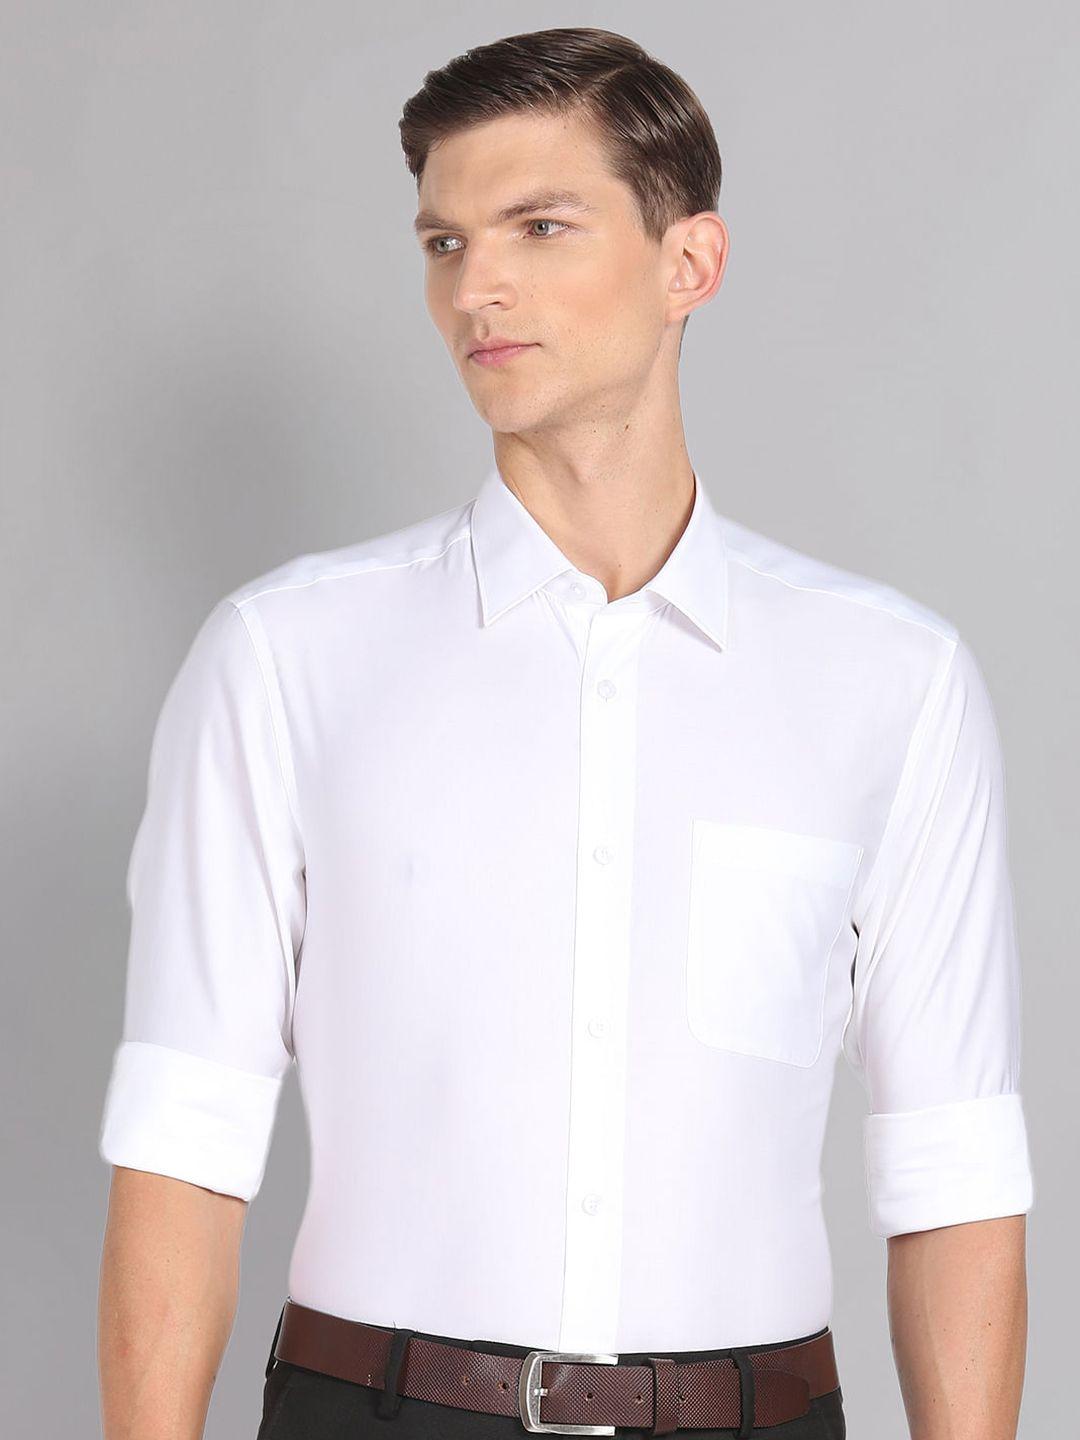 ad by arvind twill pure cotton formal shirt